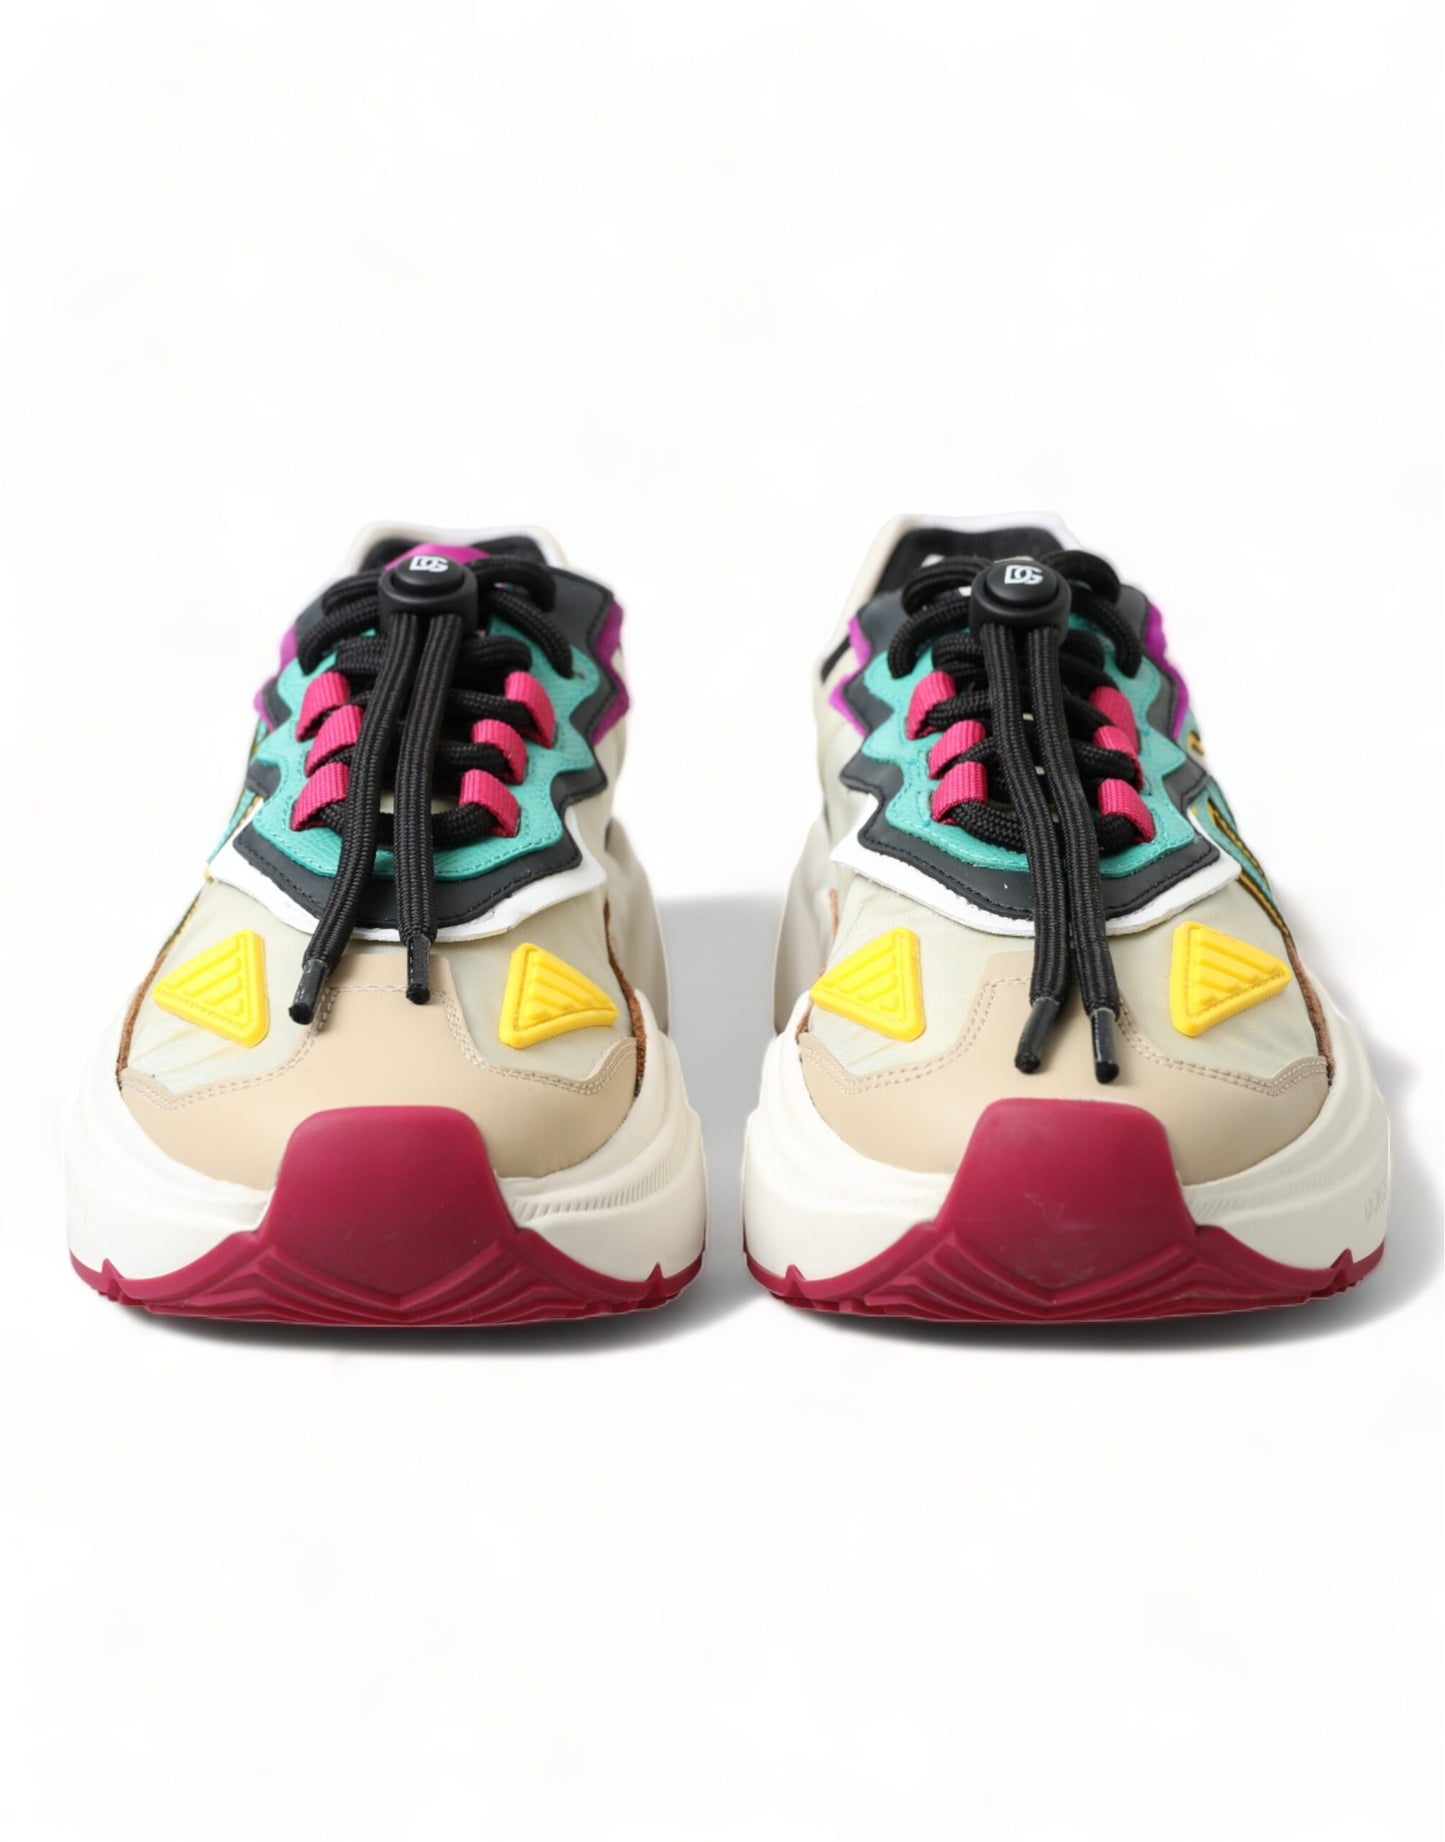 Dolce & Gabbana Chic Multicolor Daymaster Sneakers